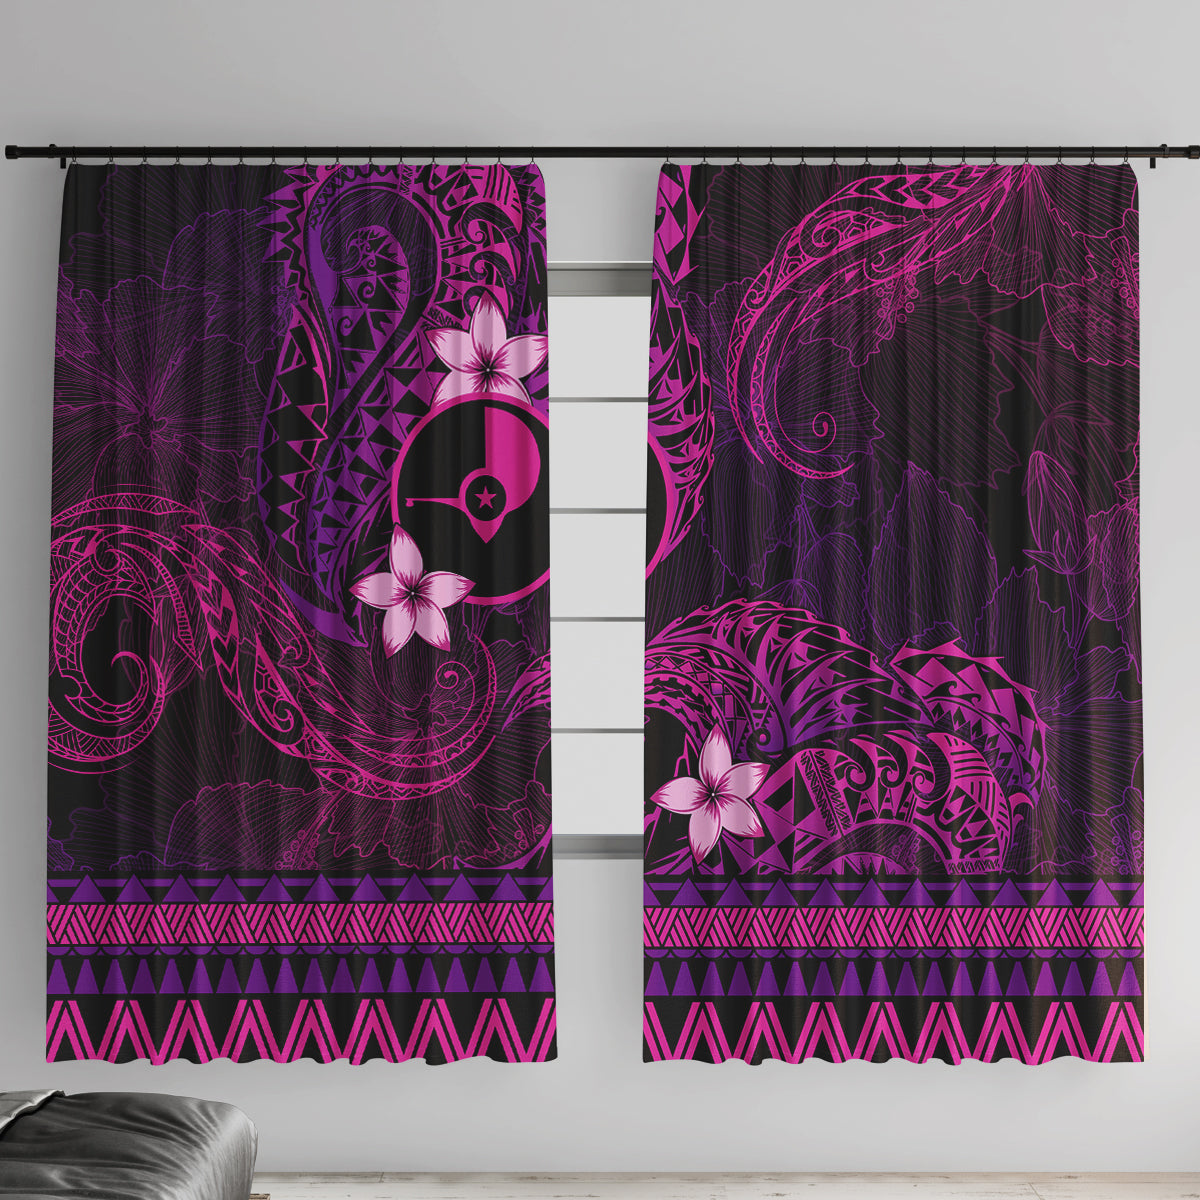 FSM Yap State Window Curtain Tribal Pattern Pink Version LT01 With Hooks Pink - Polynesian Pride